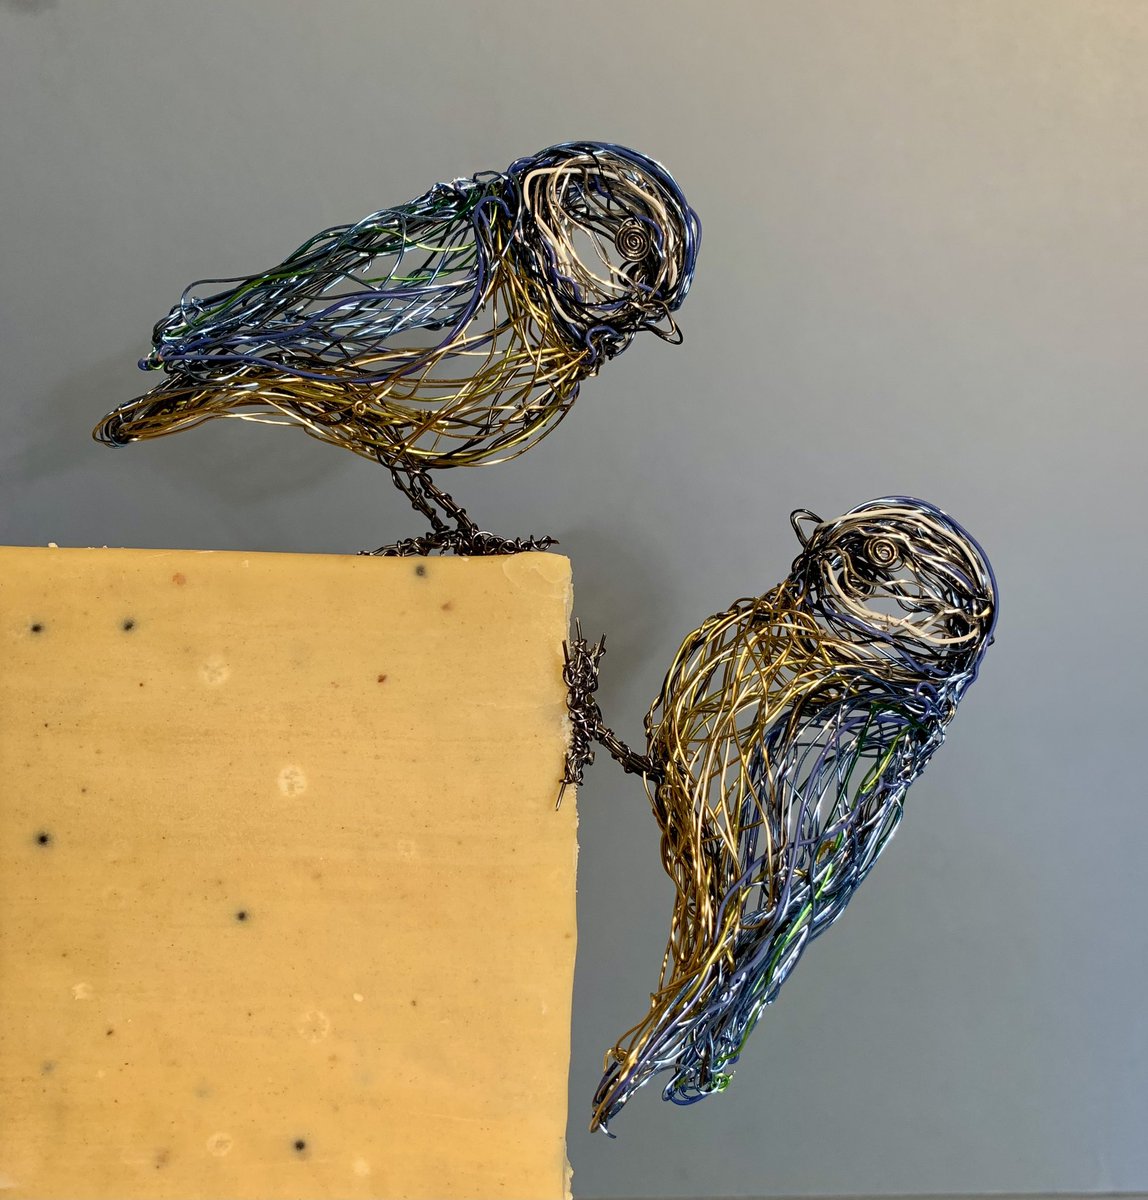 Bluetits just finished and ready for the exhibition At Artspace,Woodbridge,Suffolk from 23-29 March .#Suffolkartist #woodbridge #artforsale #suffolkmagazine #bluetit